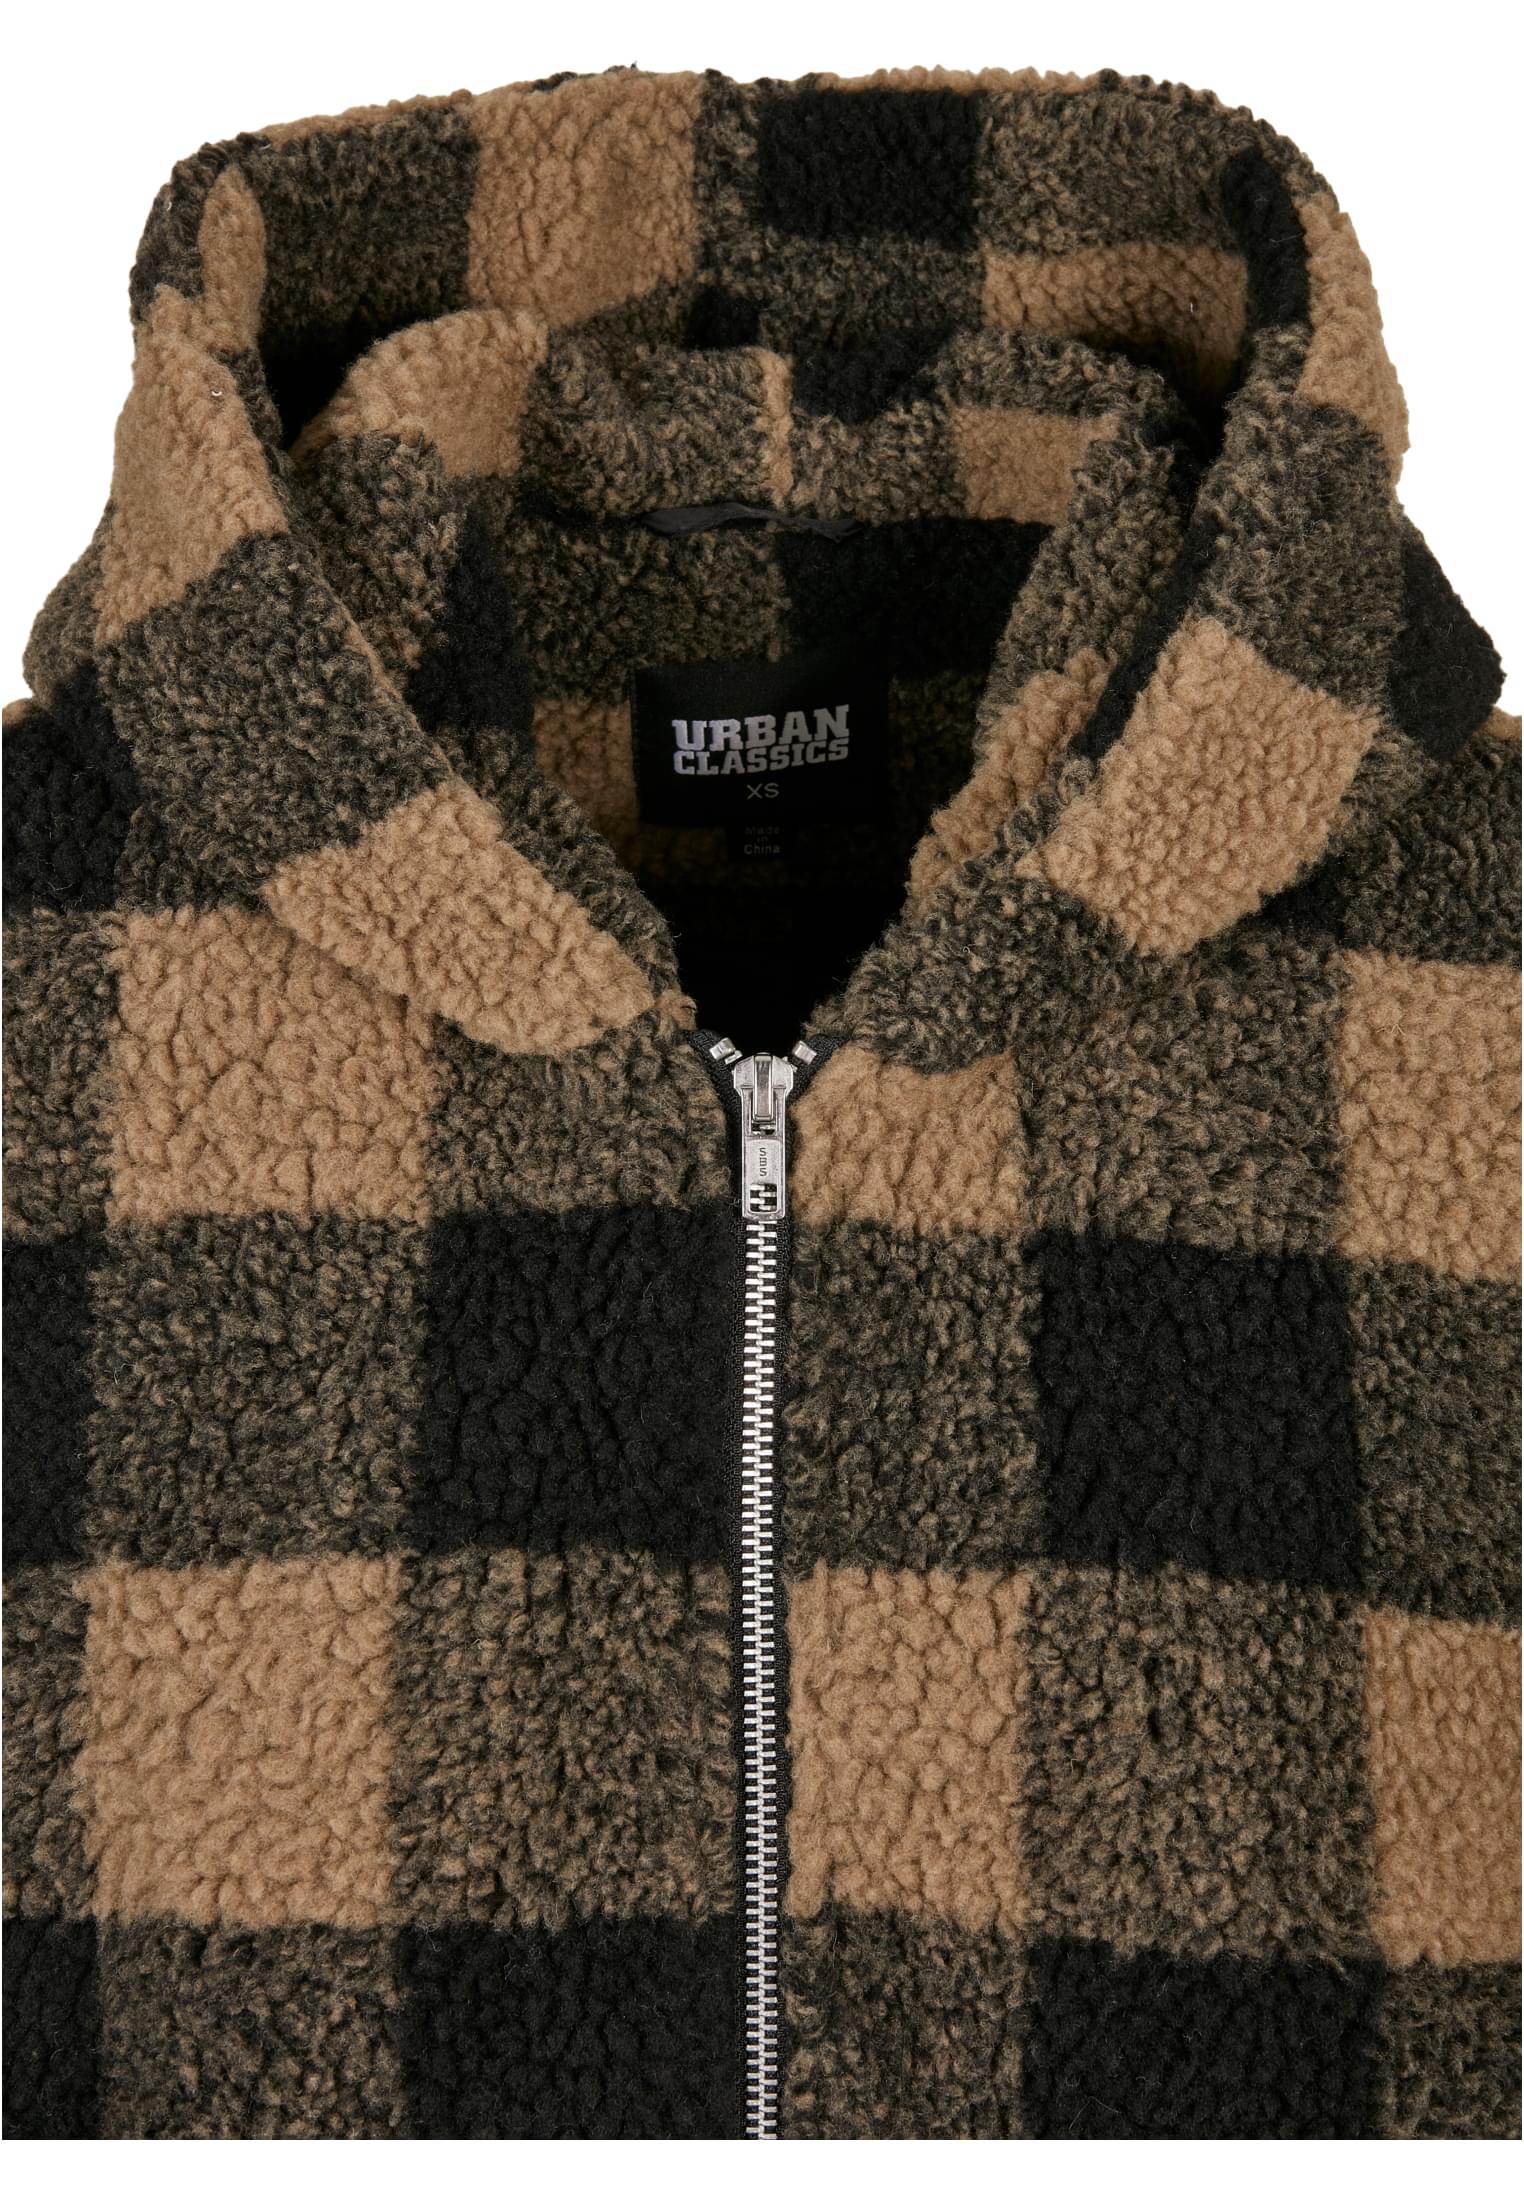 Check Jacket-TB3056 Sherpa Ladies Oversized Hooded